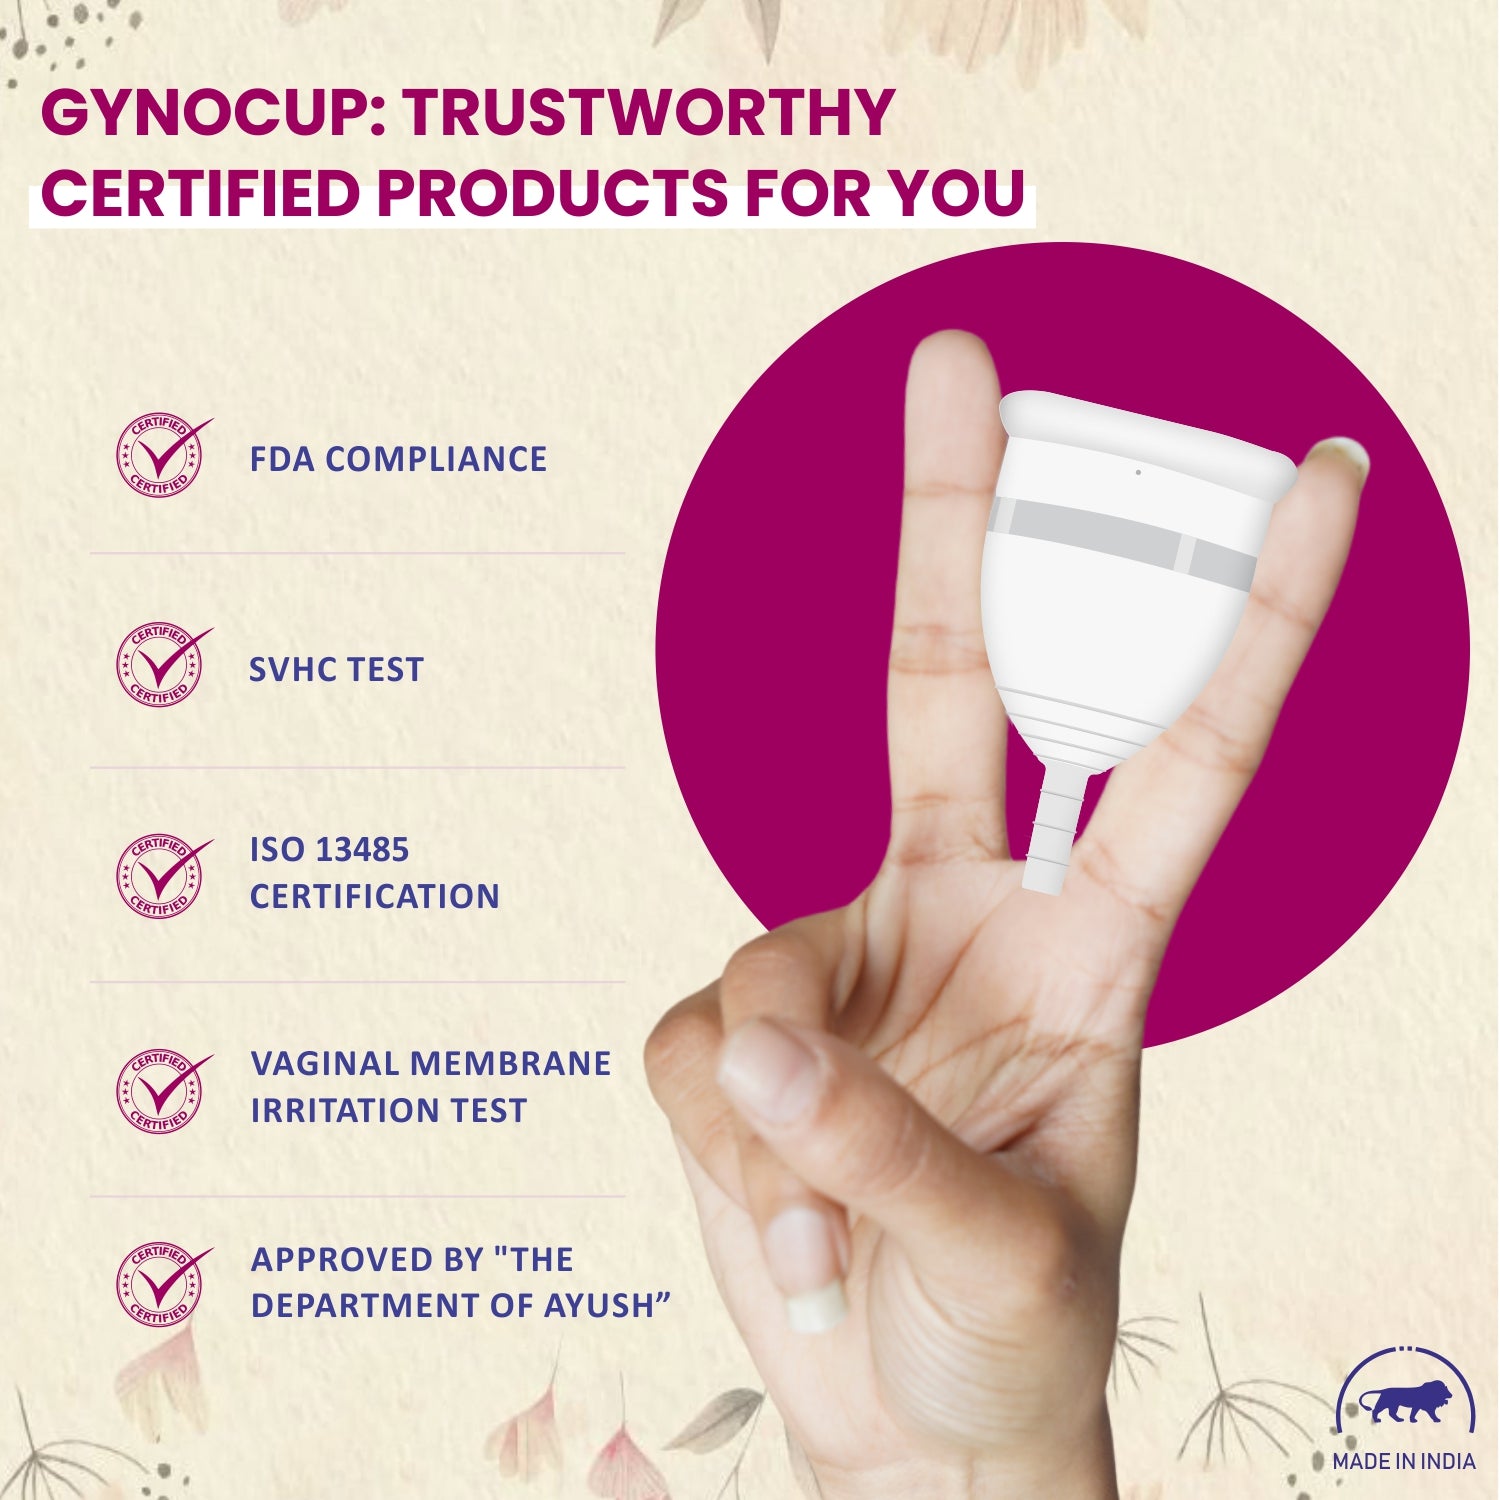 Gynocup Reusable Menstrual Cup For Women | Ultra Soft, Odor & Rash Free | 100% Medical Grade Silicone